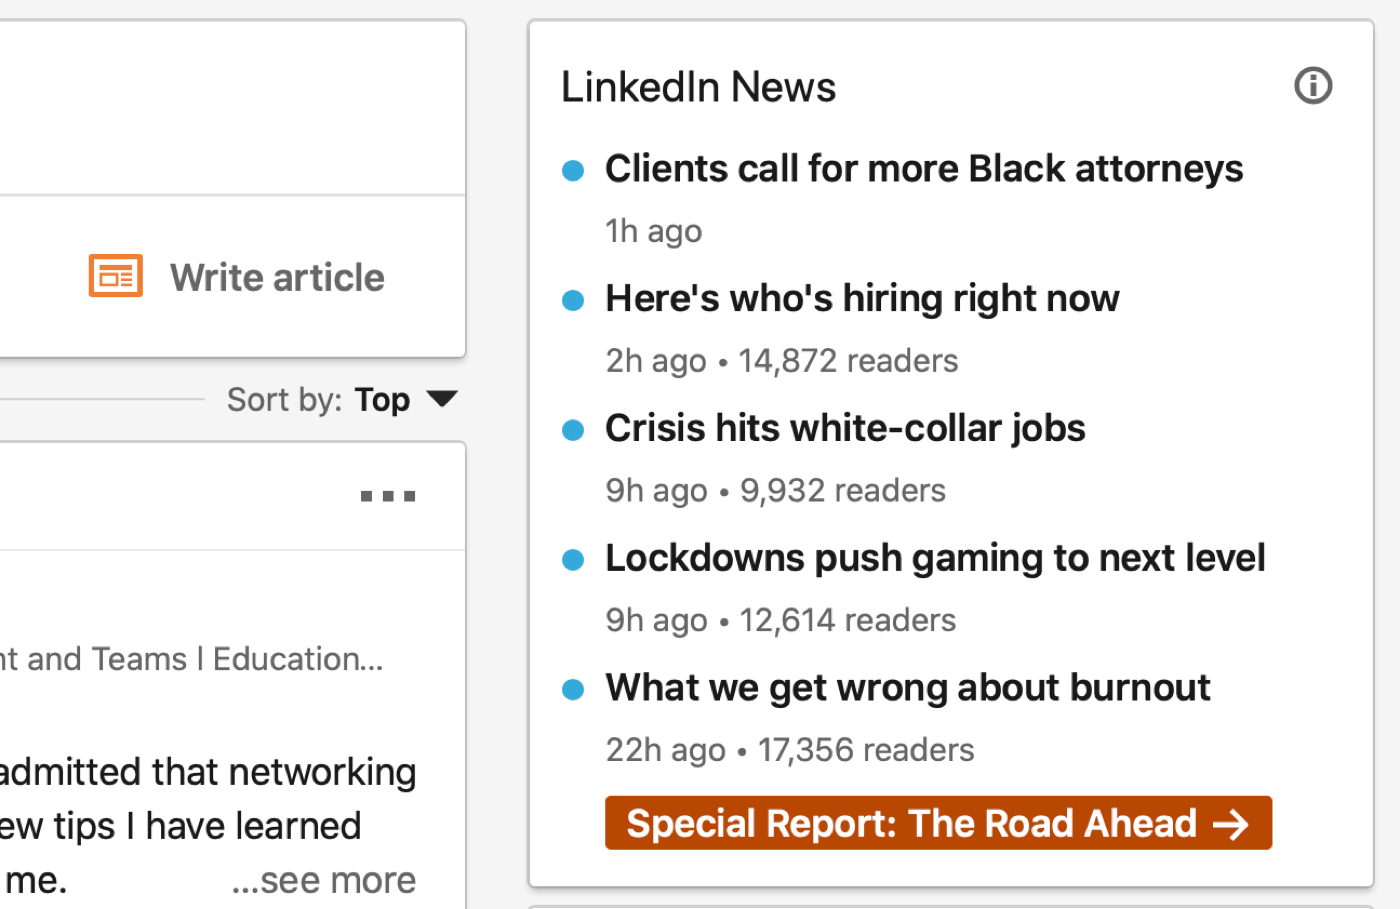 example screenshot of linkedin home page with the linkedin news section central to the image